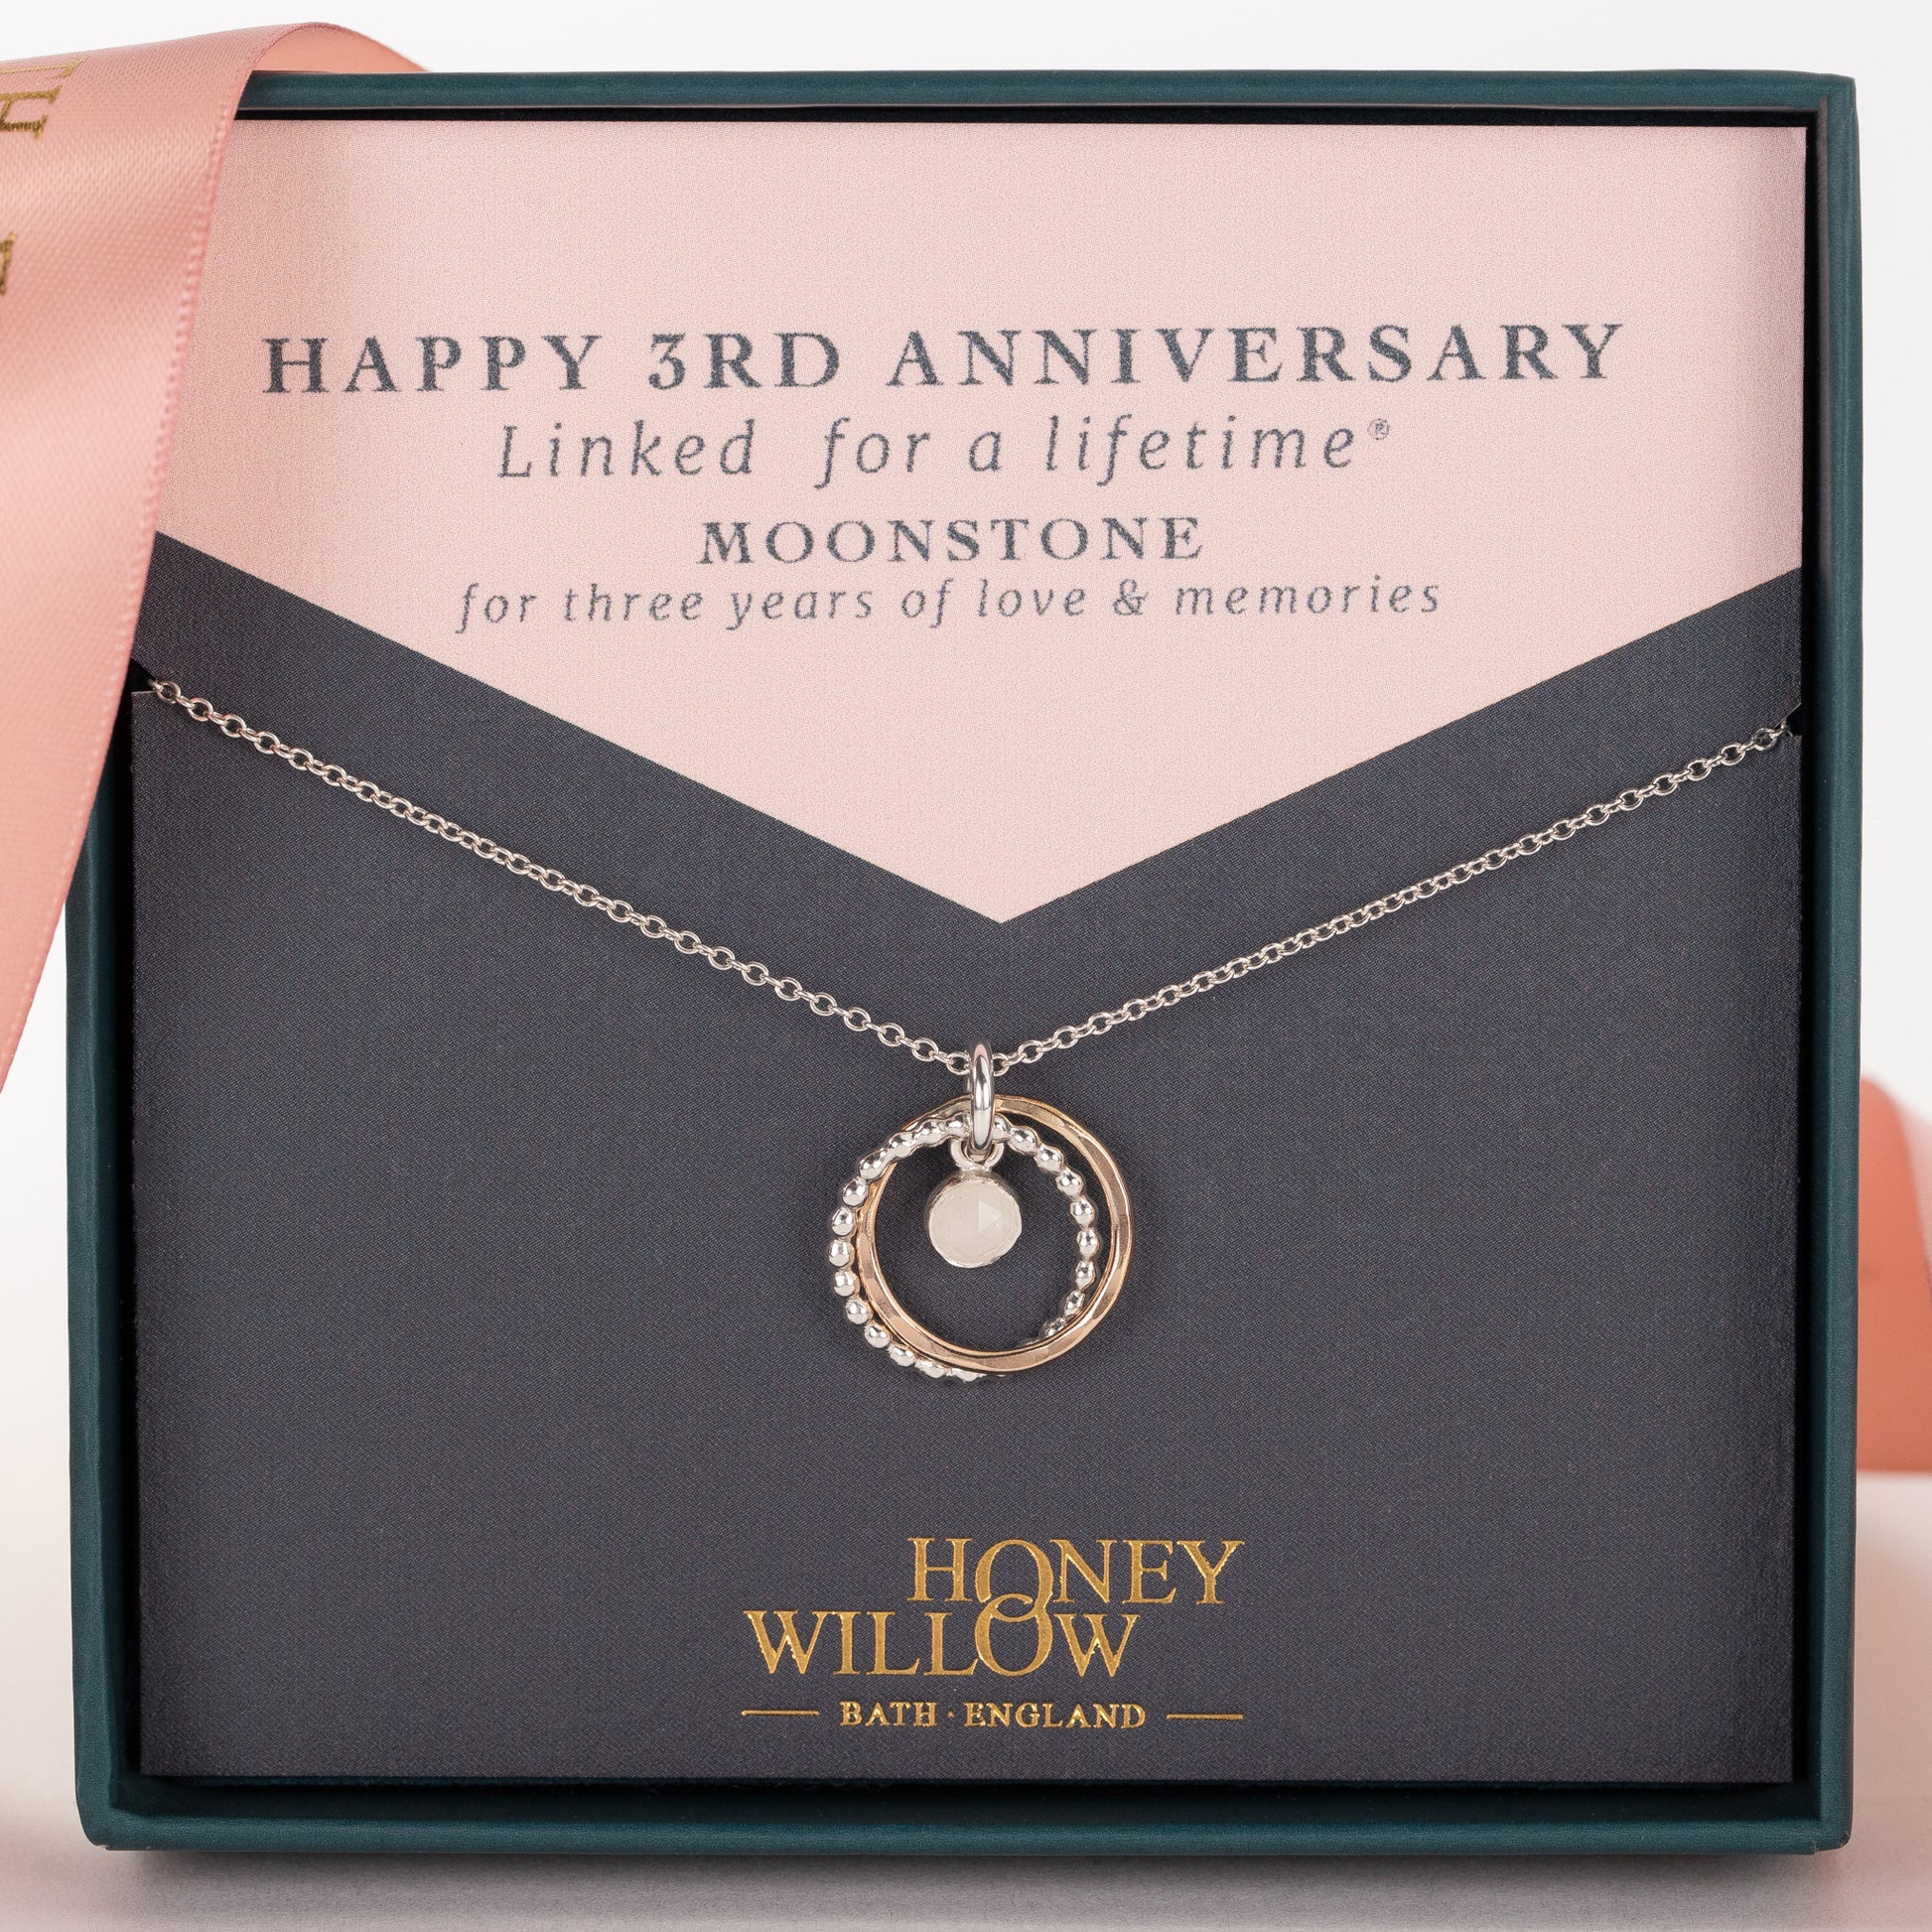 3rd Anniversary Gift - Moonstone Necklace - Silver & Gold